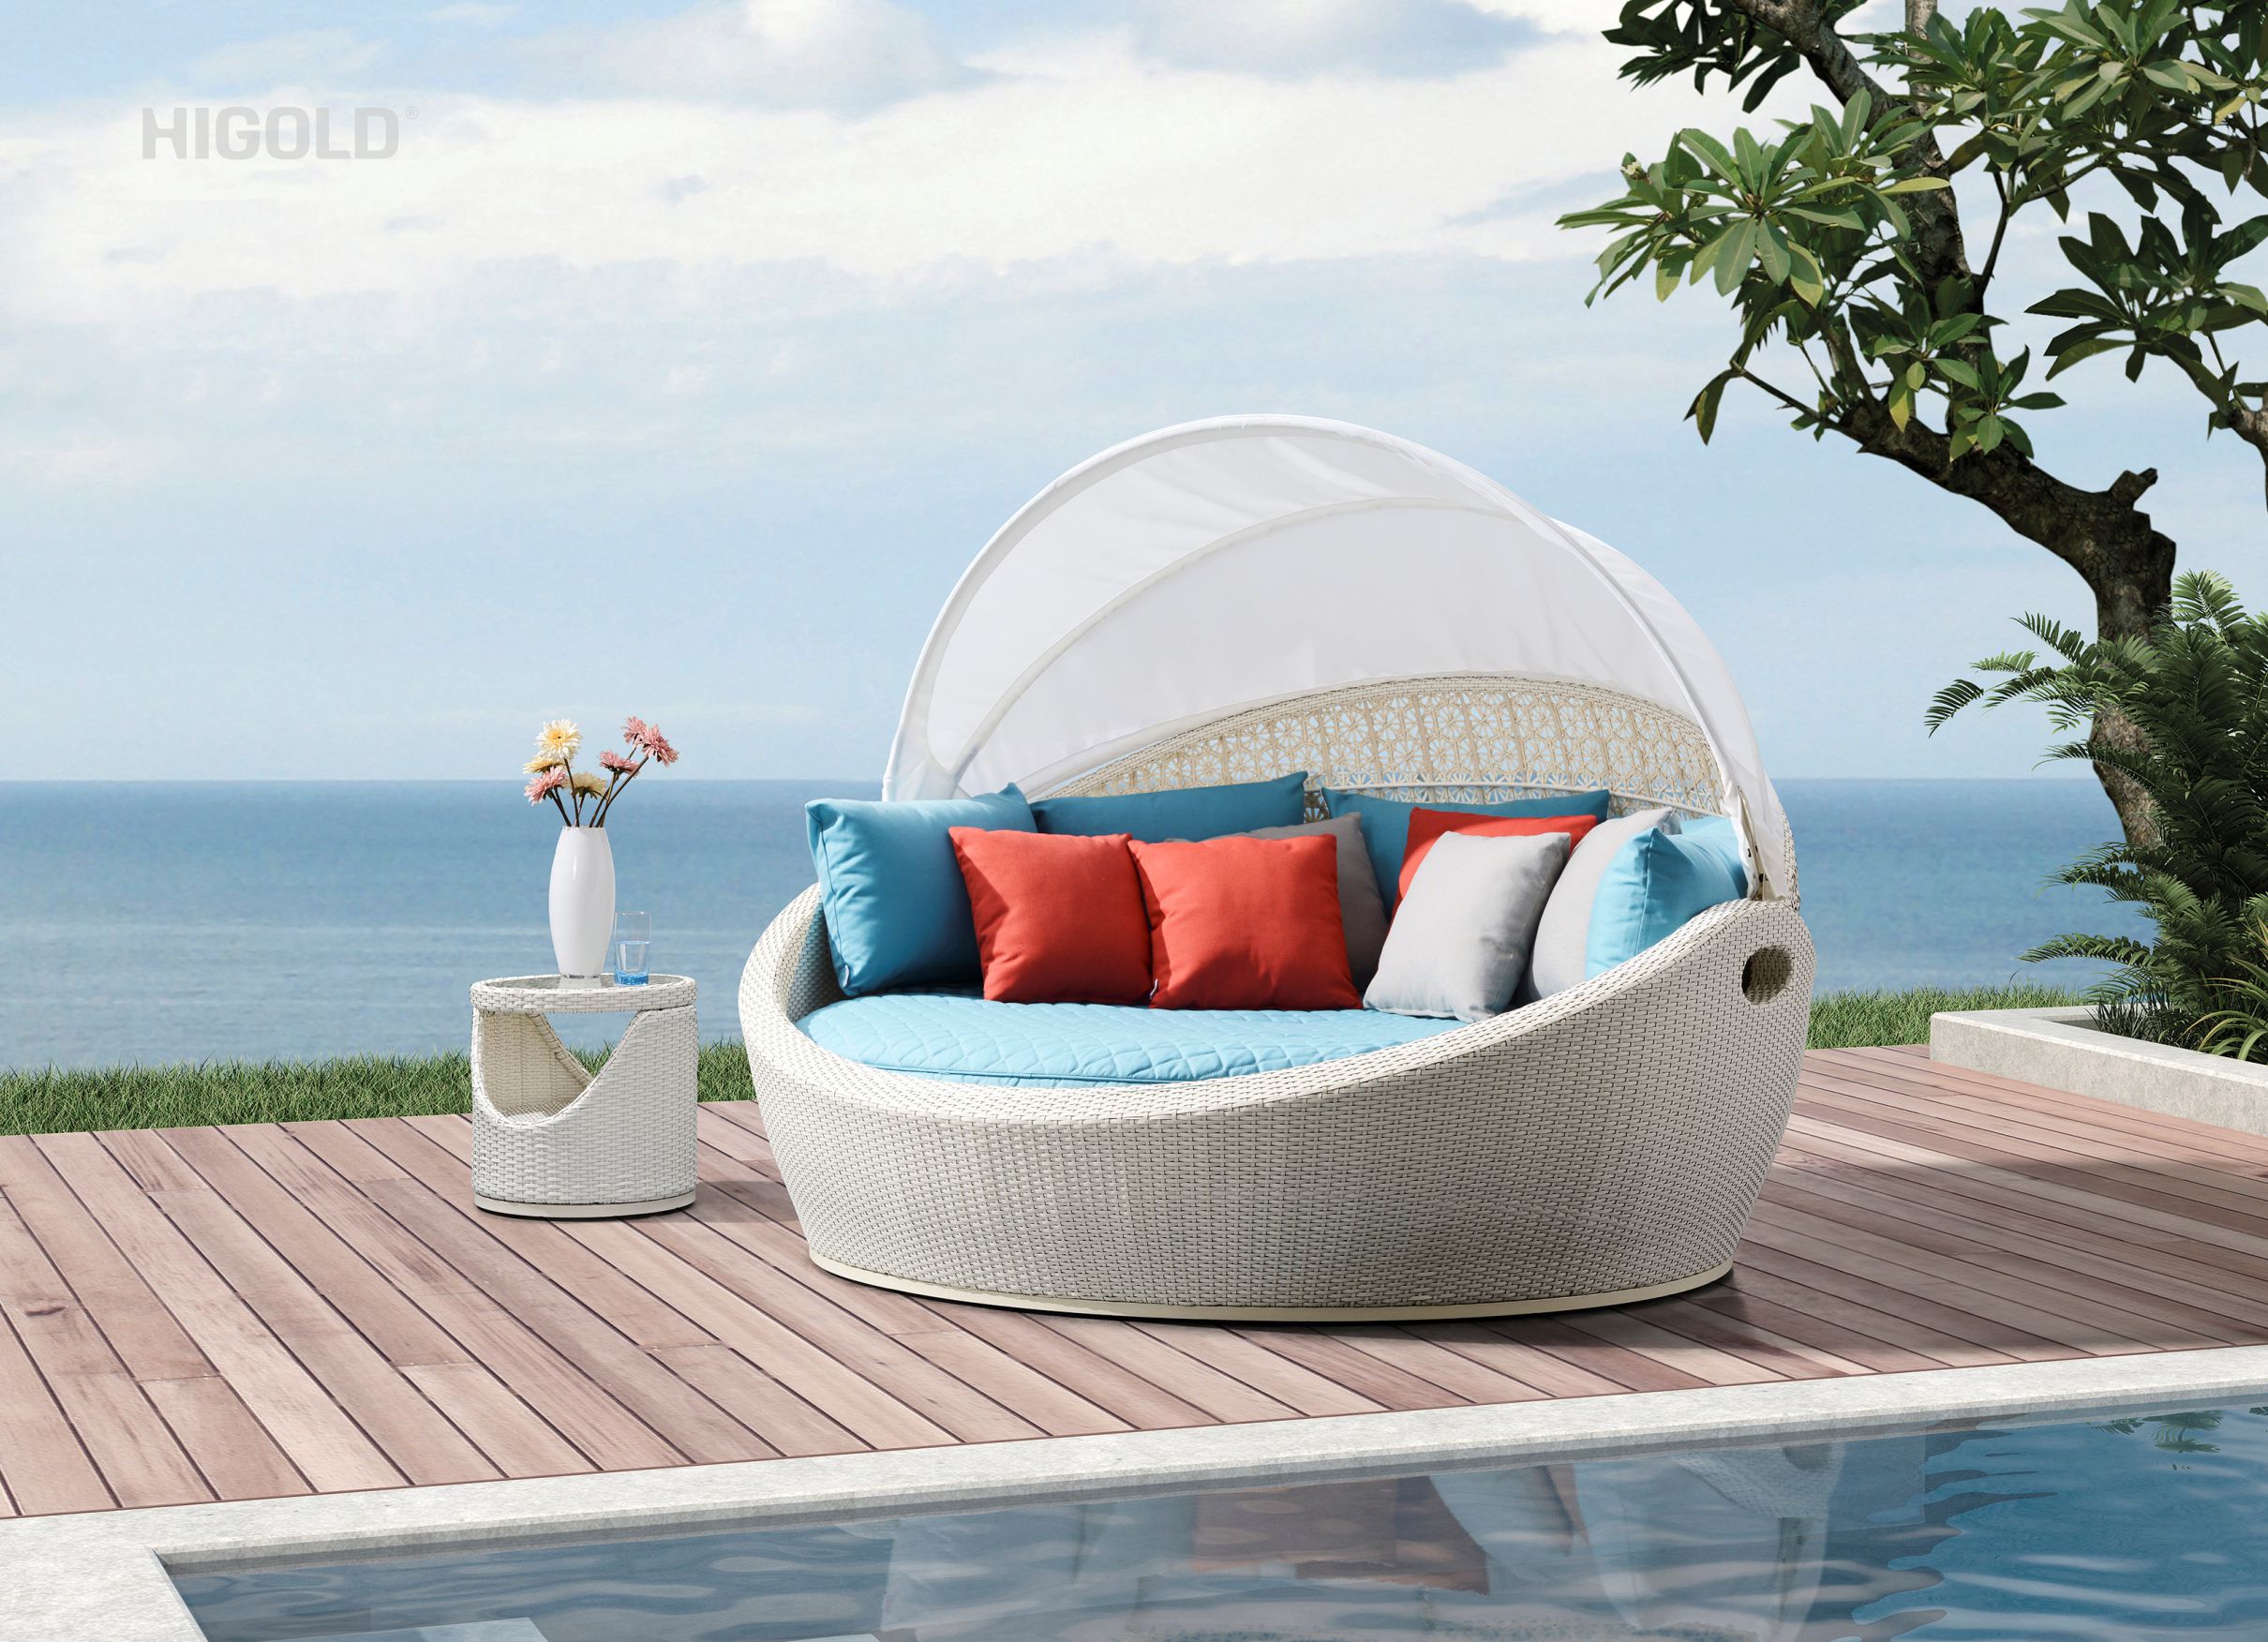 Tulip Chaise Lounge 203090